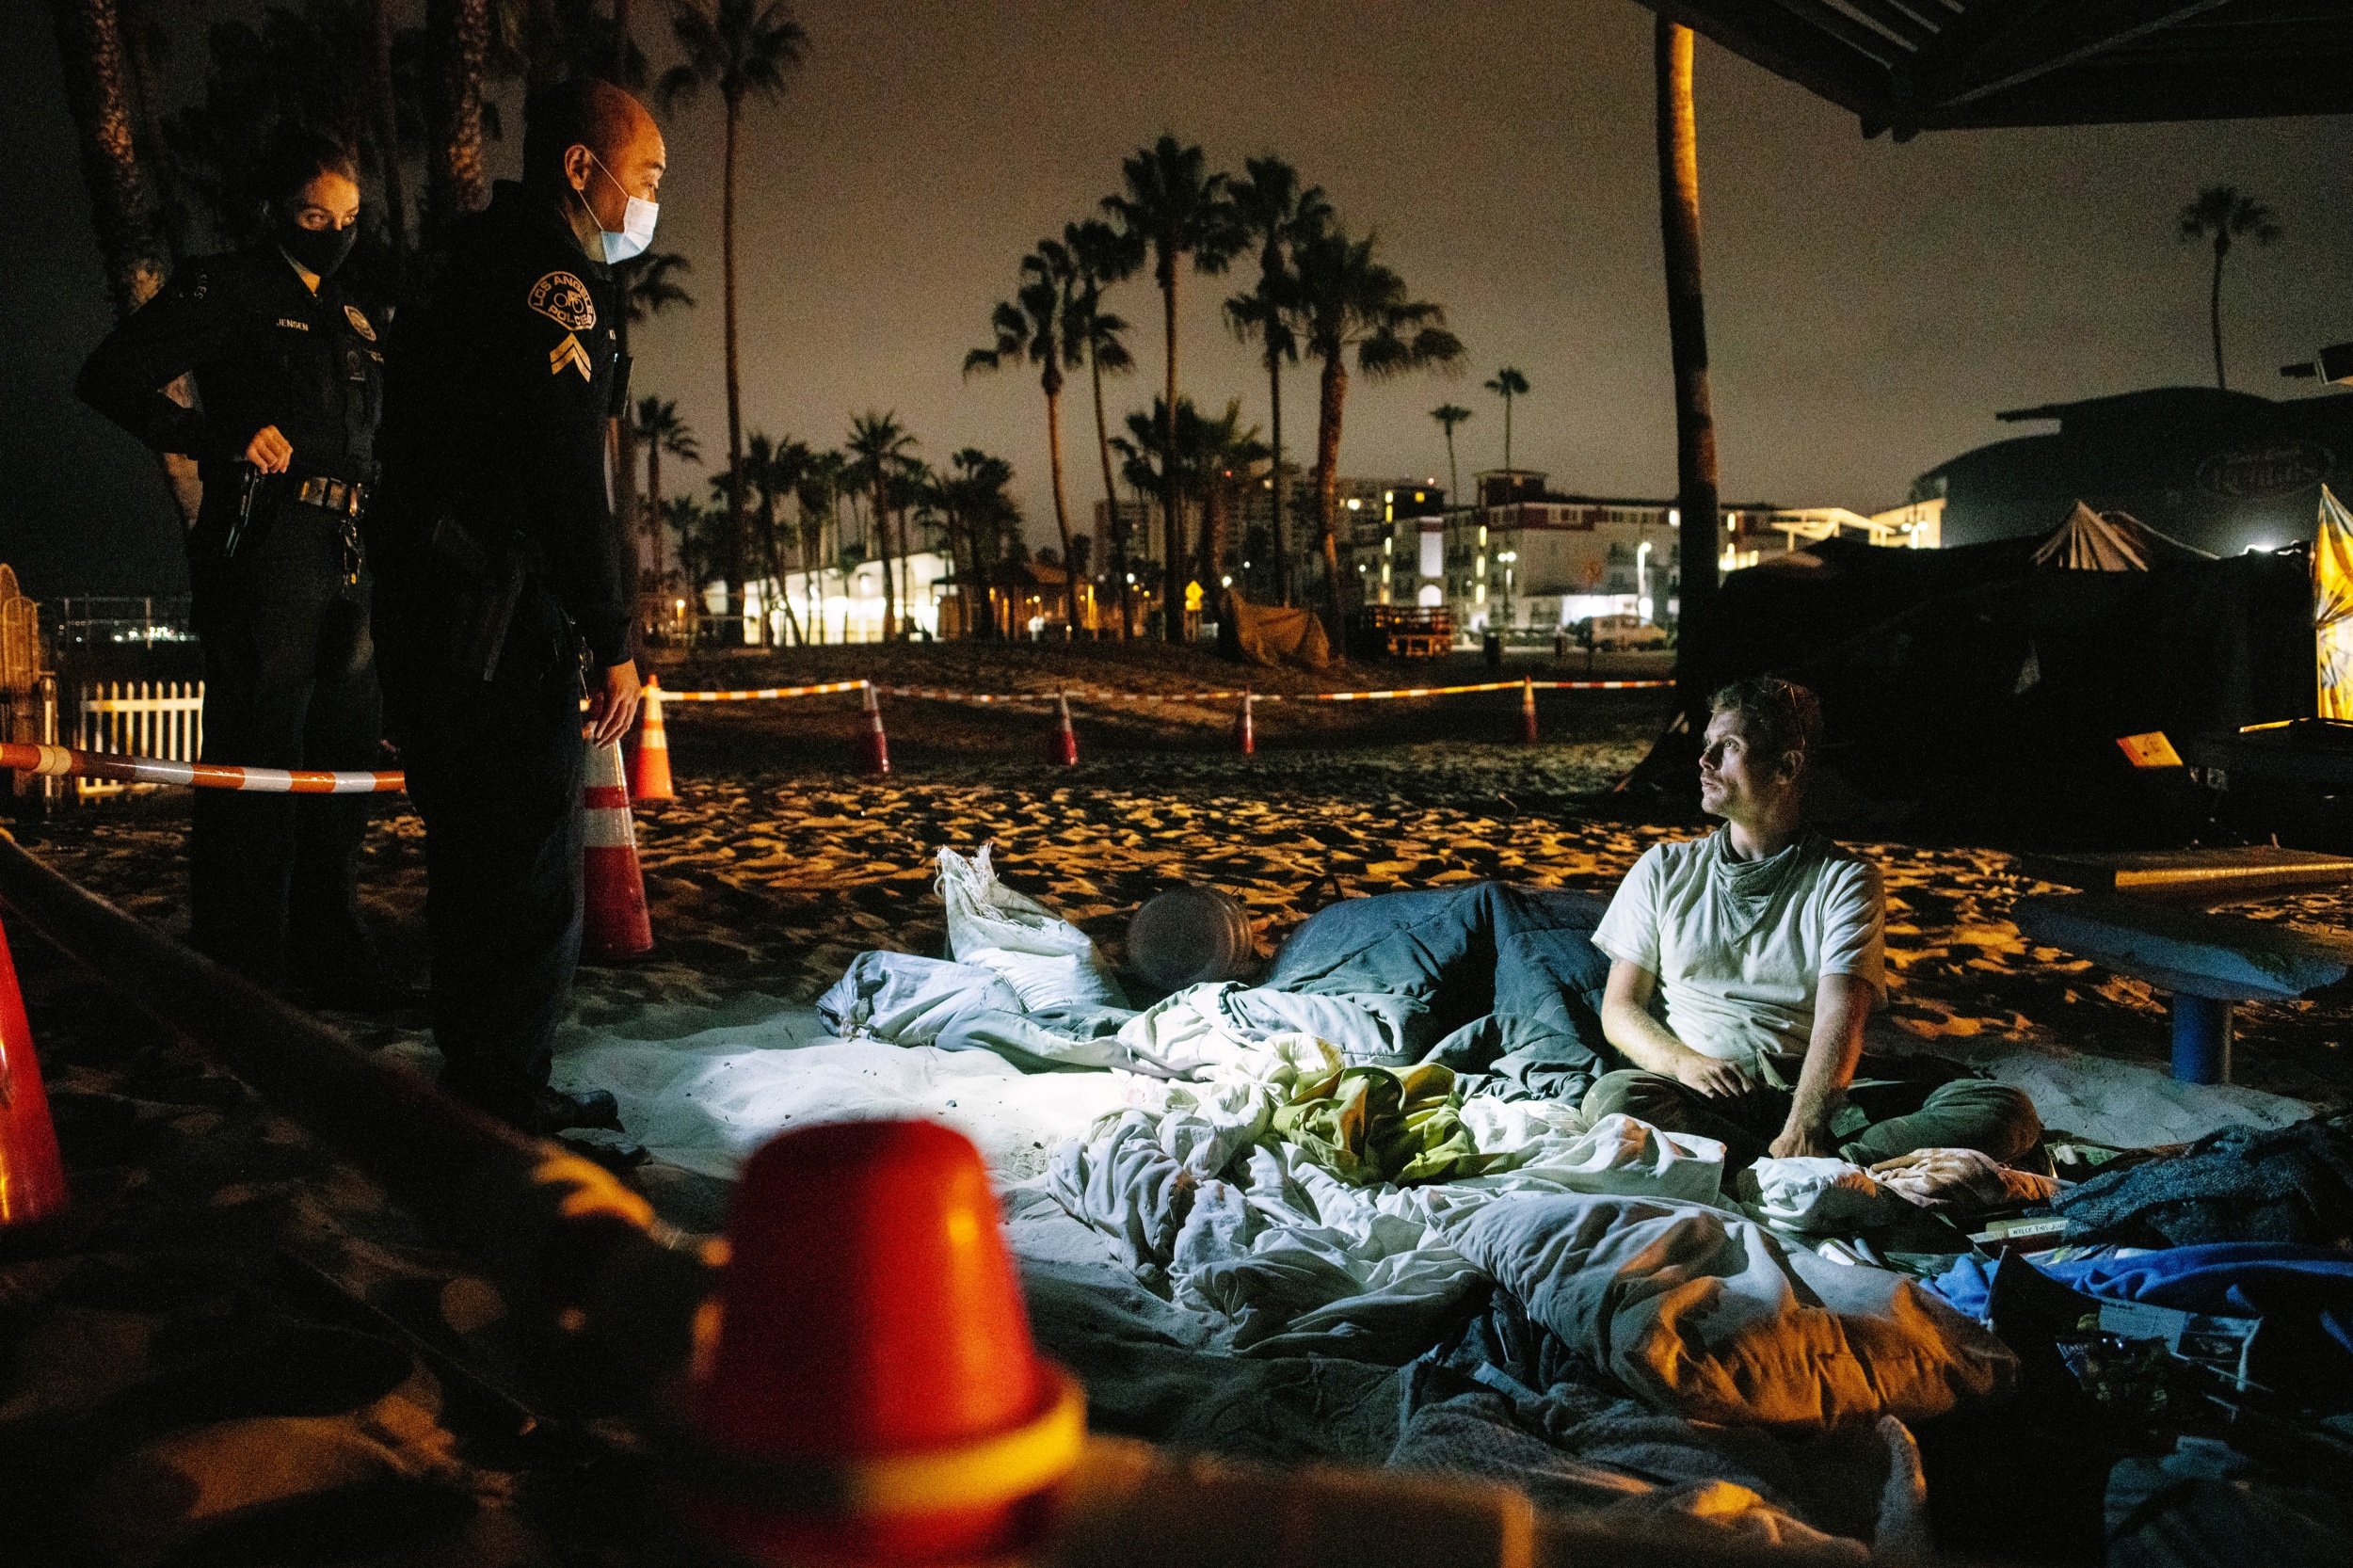  Los Angeles Police surround an unhoused man, sleeping on Venice Beach. In the summer of 2021 the city of Los Angeles carried out massive sweeps of the homeless. July 2021. Venice Beach, Los Angeles, CA.   